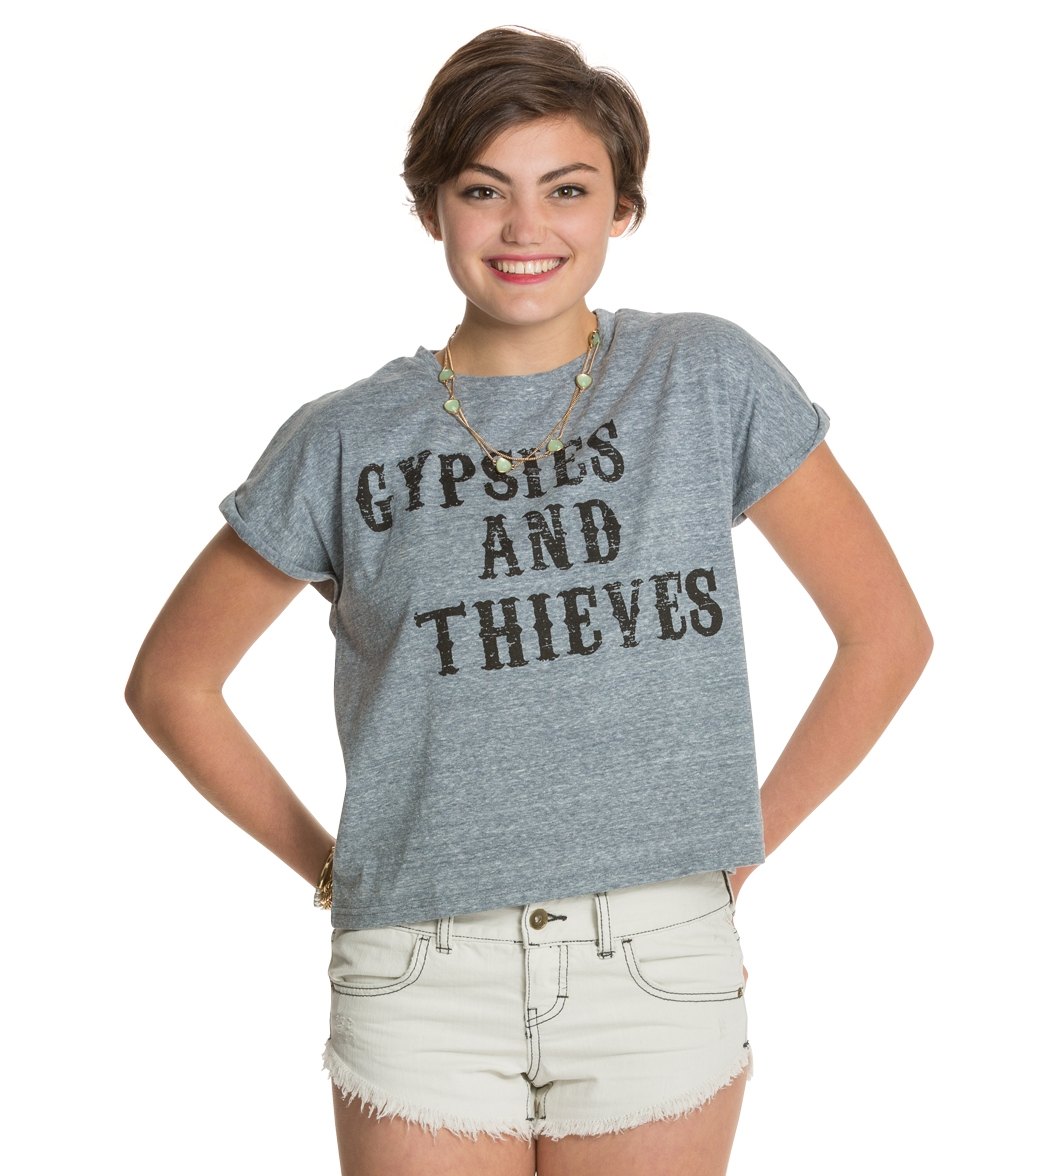 Minkpink Gypsies And Thieves Tee Shirt - Grey X-Small Cotton/Polyester - Swimoutlet.com